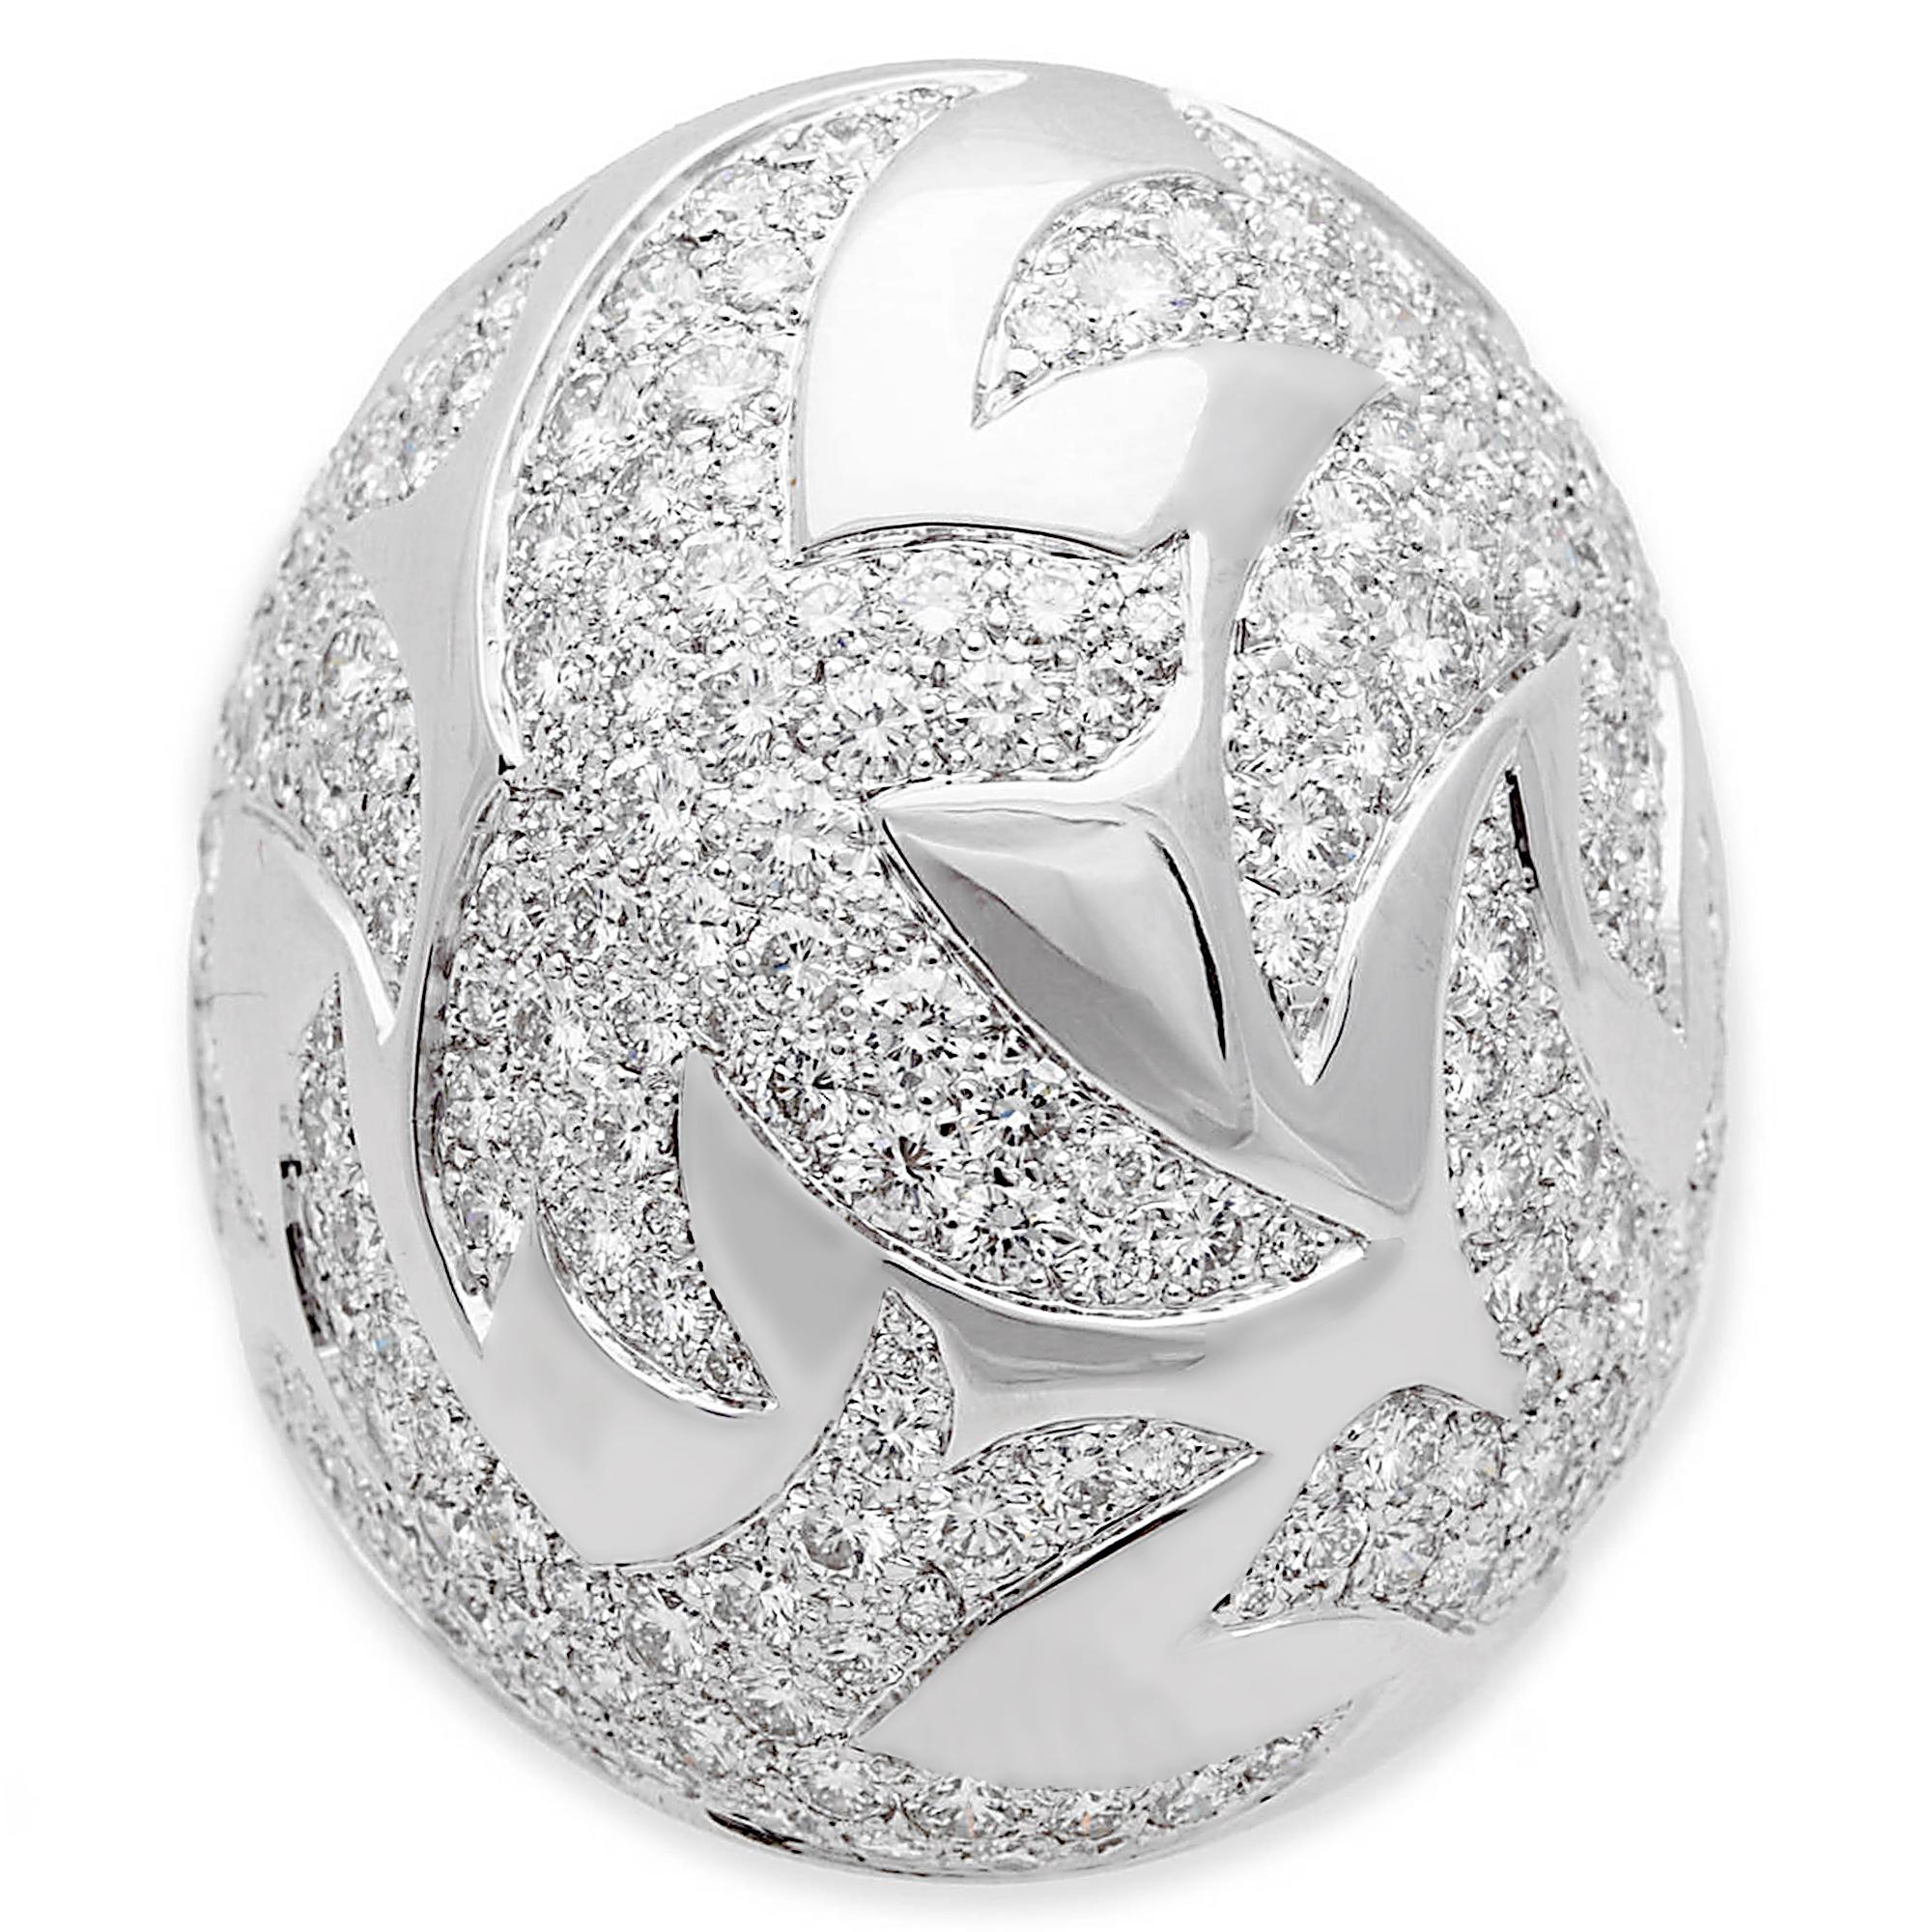 Cartier Dove of Peace Diamond White Gold Bombe Cocktail Ring

The highlight of this ring is the 253 round brilliant cut diamonds that have been expertly set into the white gold. These diamonds are known for their exceptional clarity and cut,